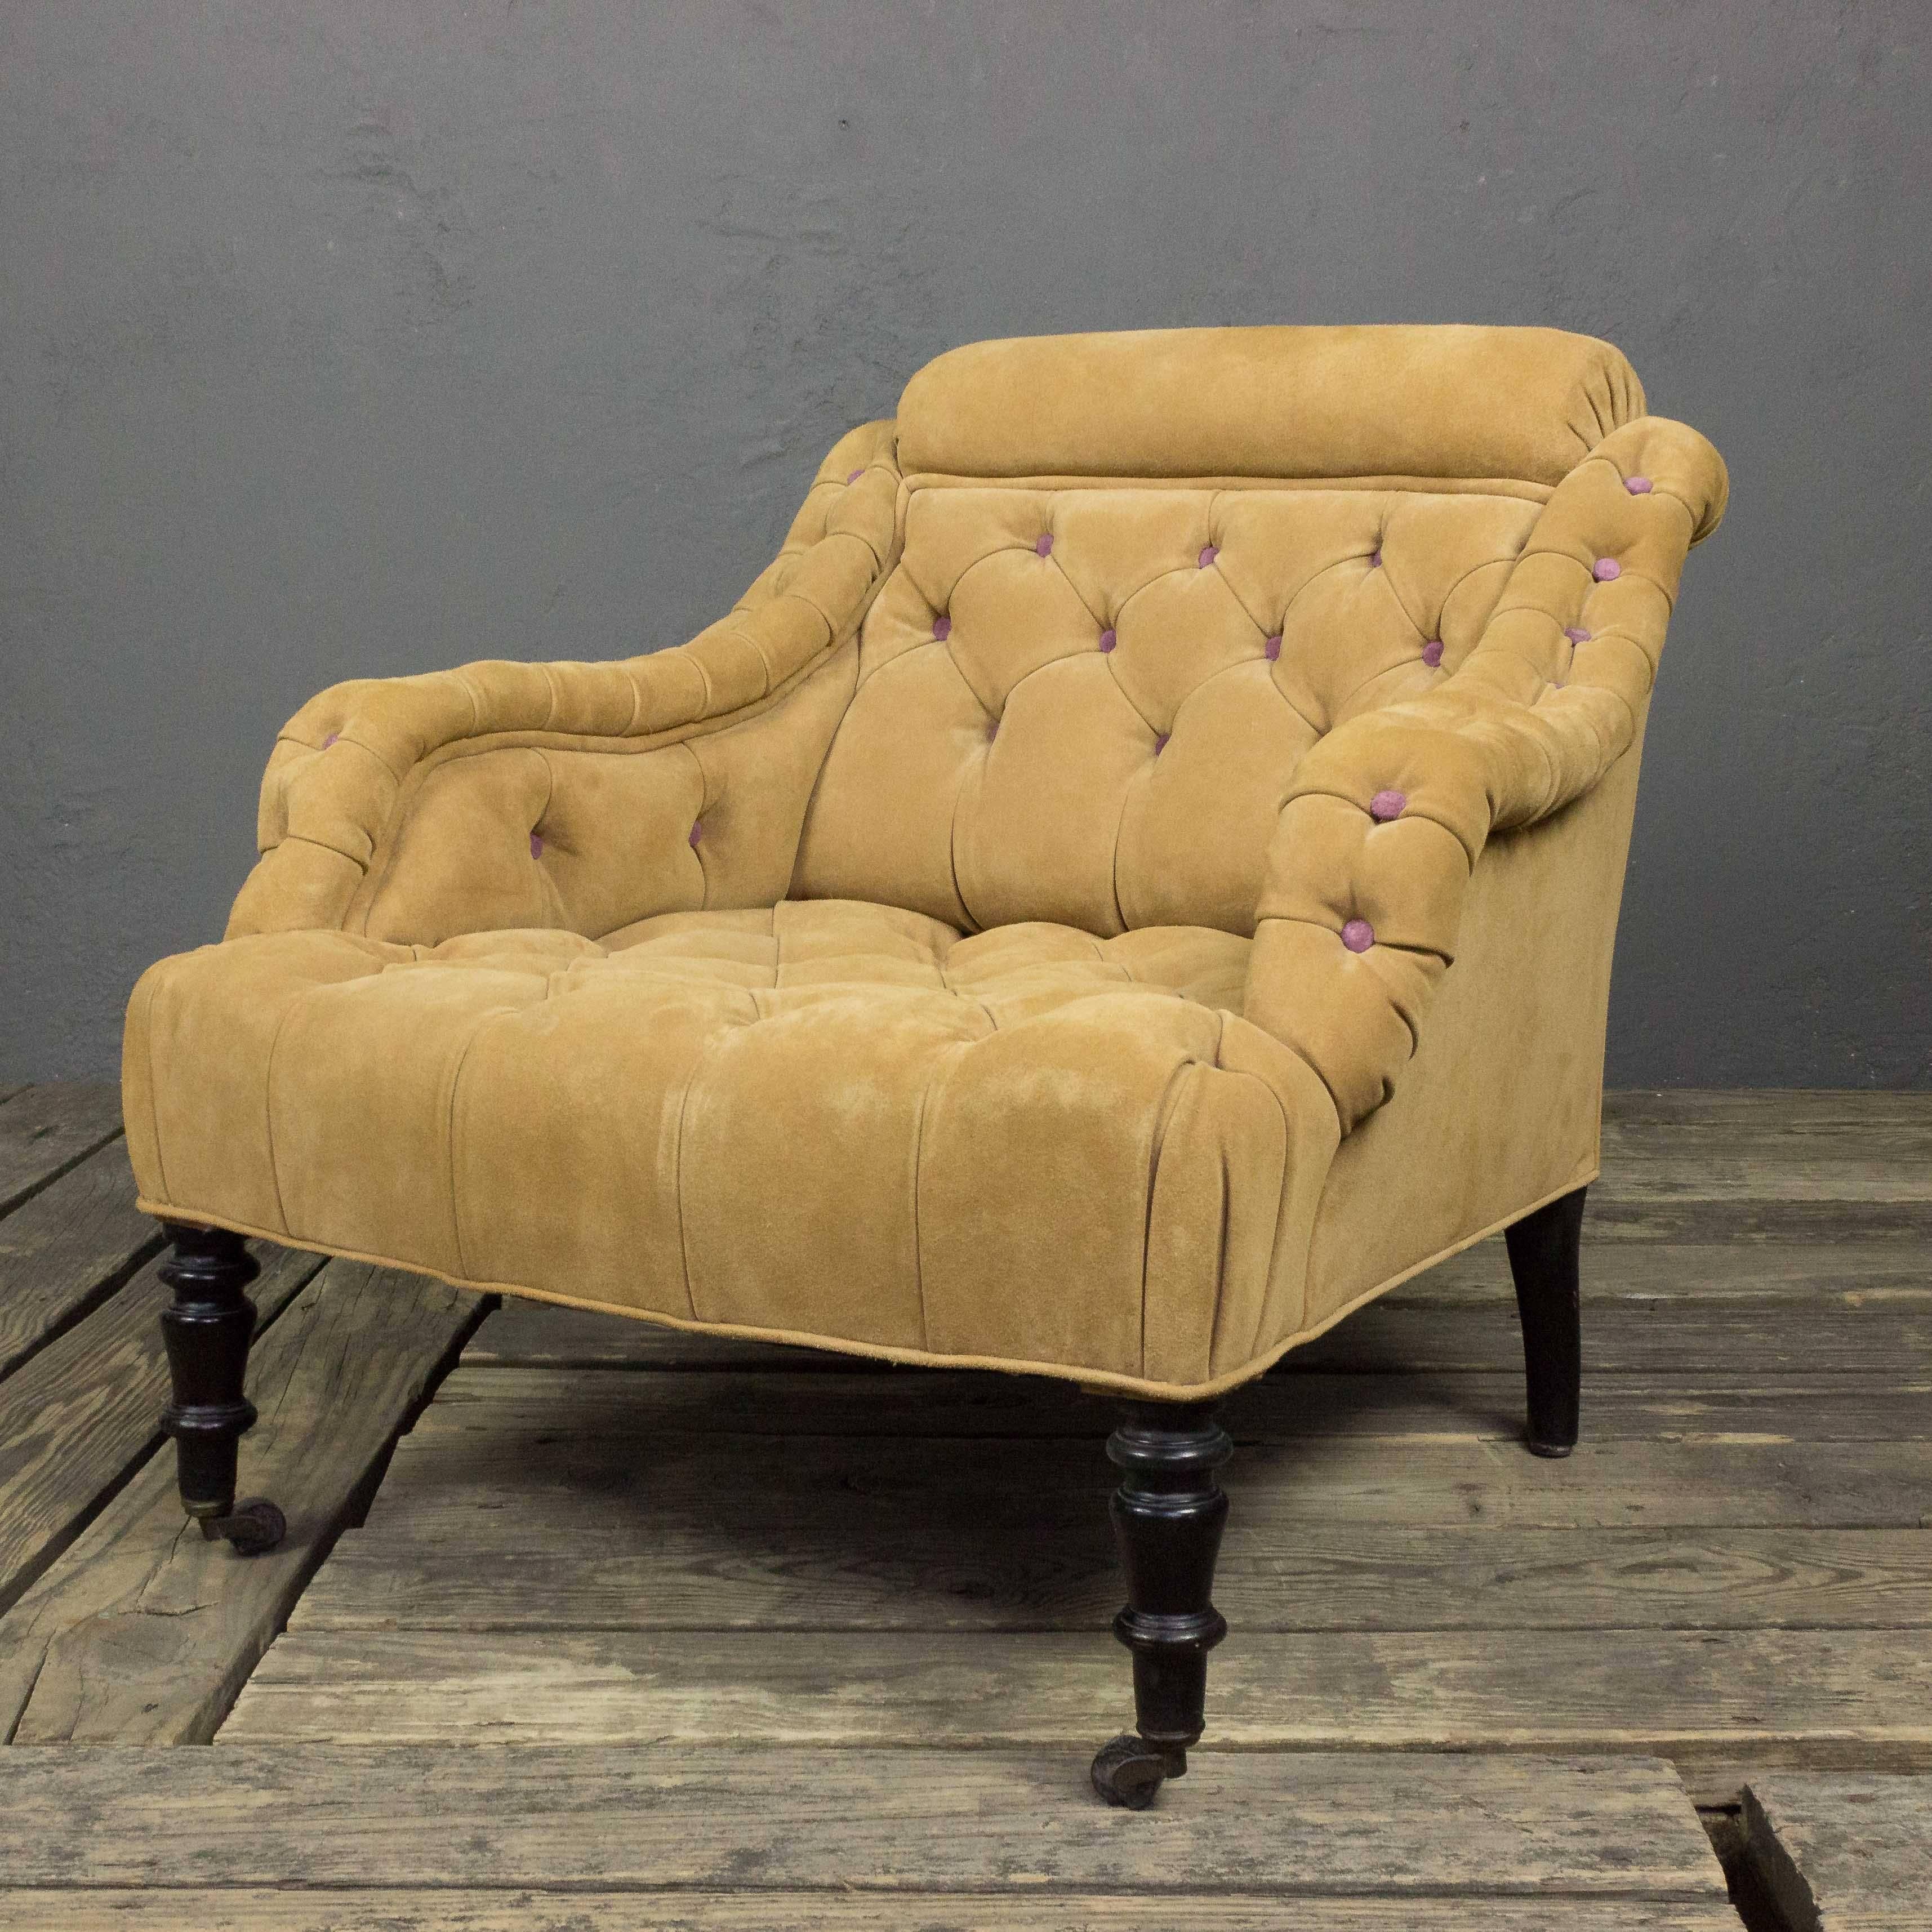 19th Century Tufted Suede Armchair In Good Condition For Sale In Buchanan, NY